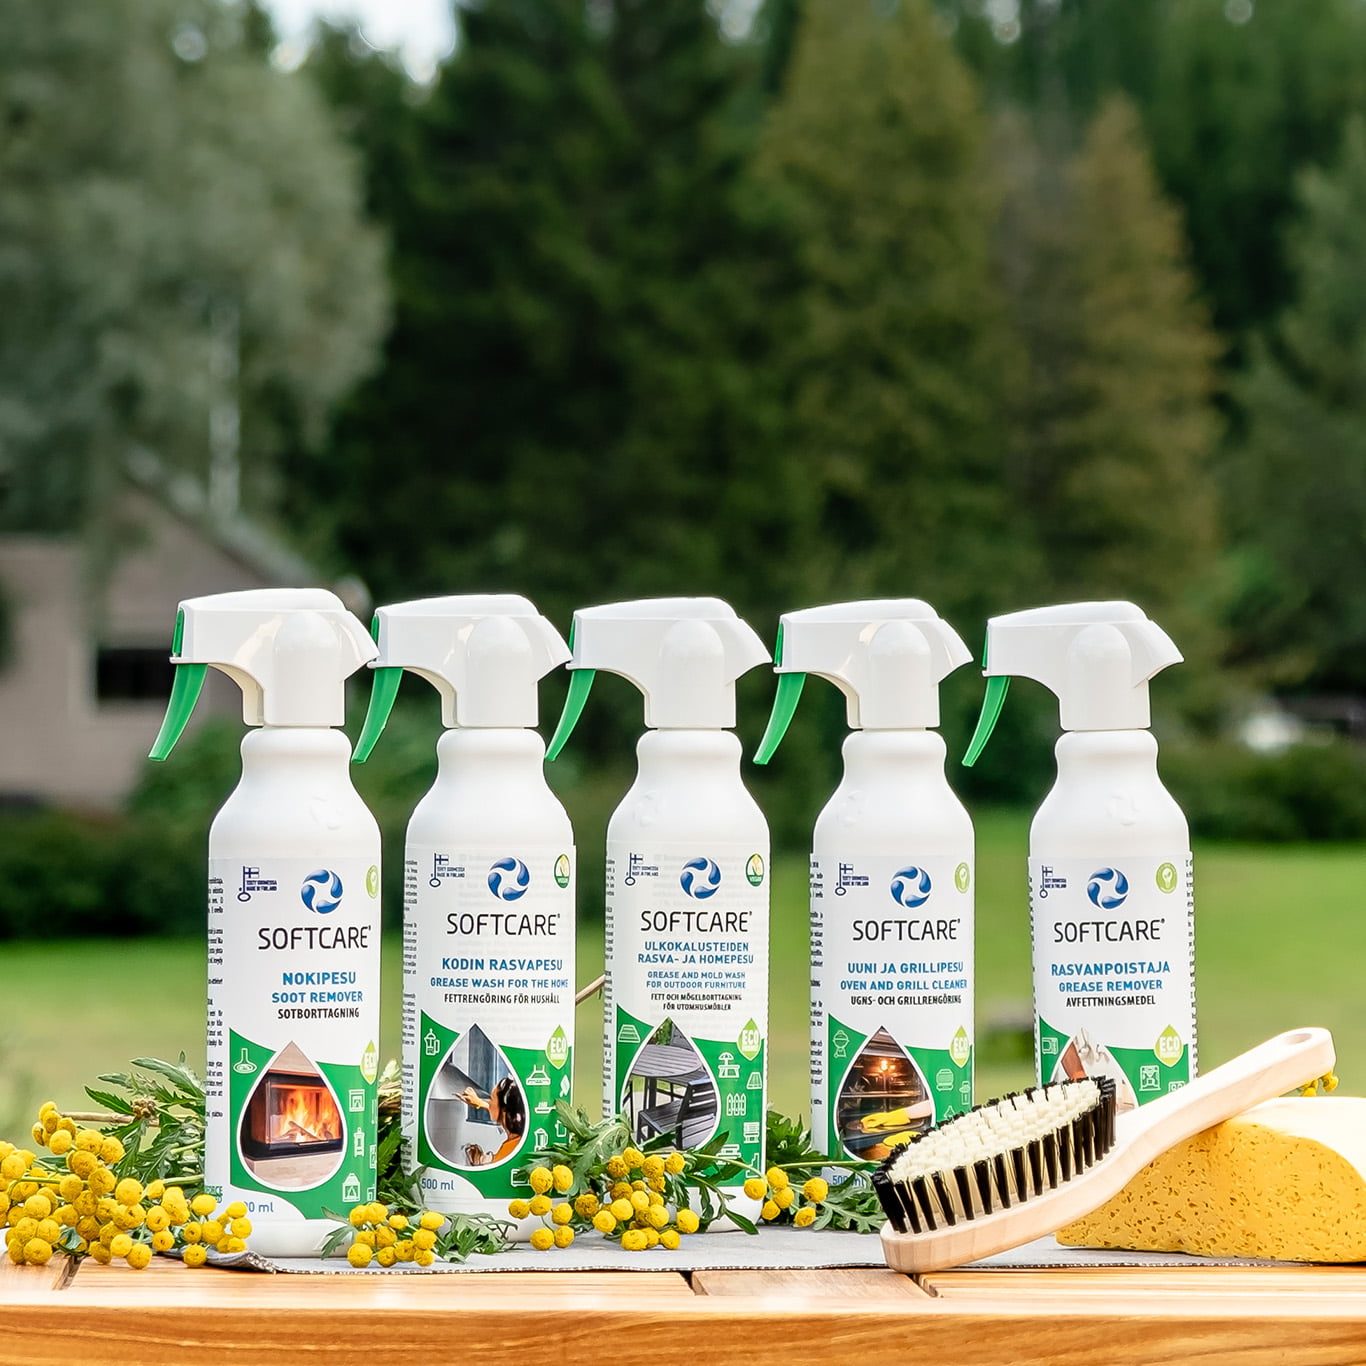 Cleaning products on the table outdoors